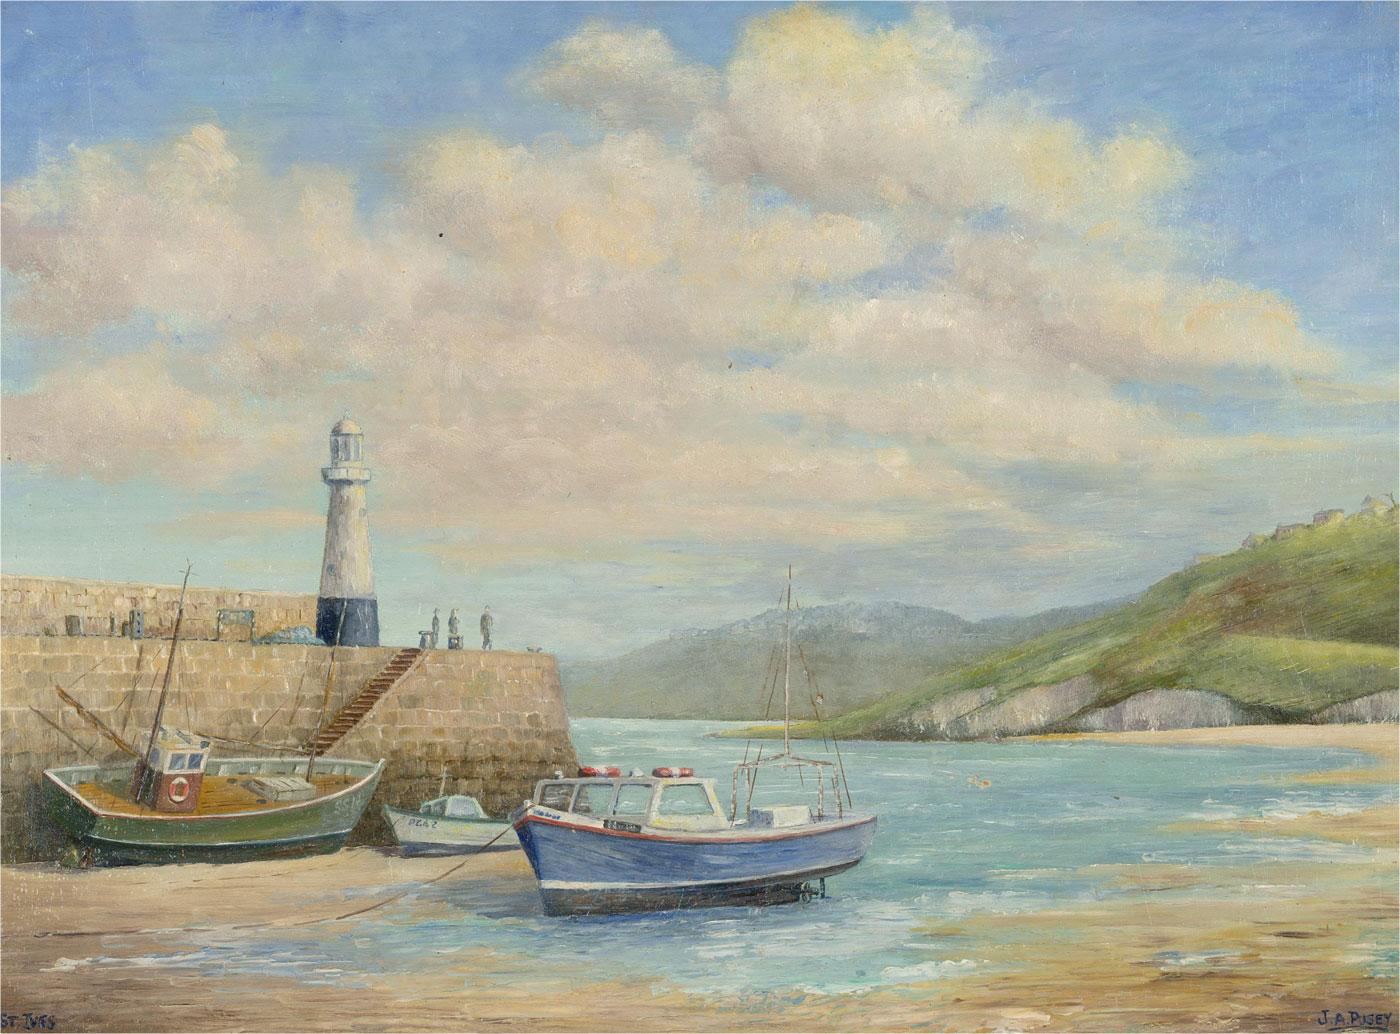 J.A. Pusey - Contemporary Oil, St Ives, Cornwall 2